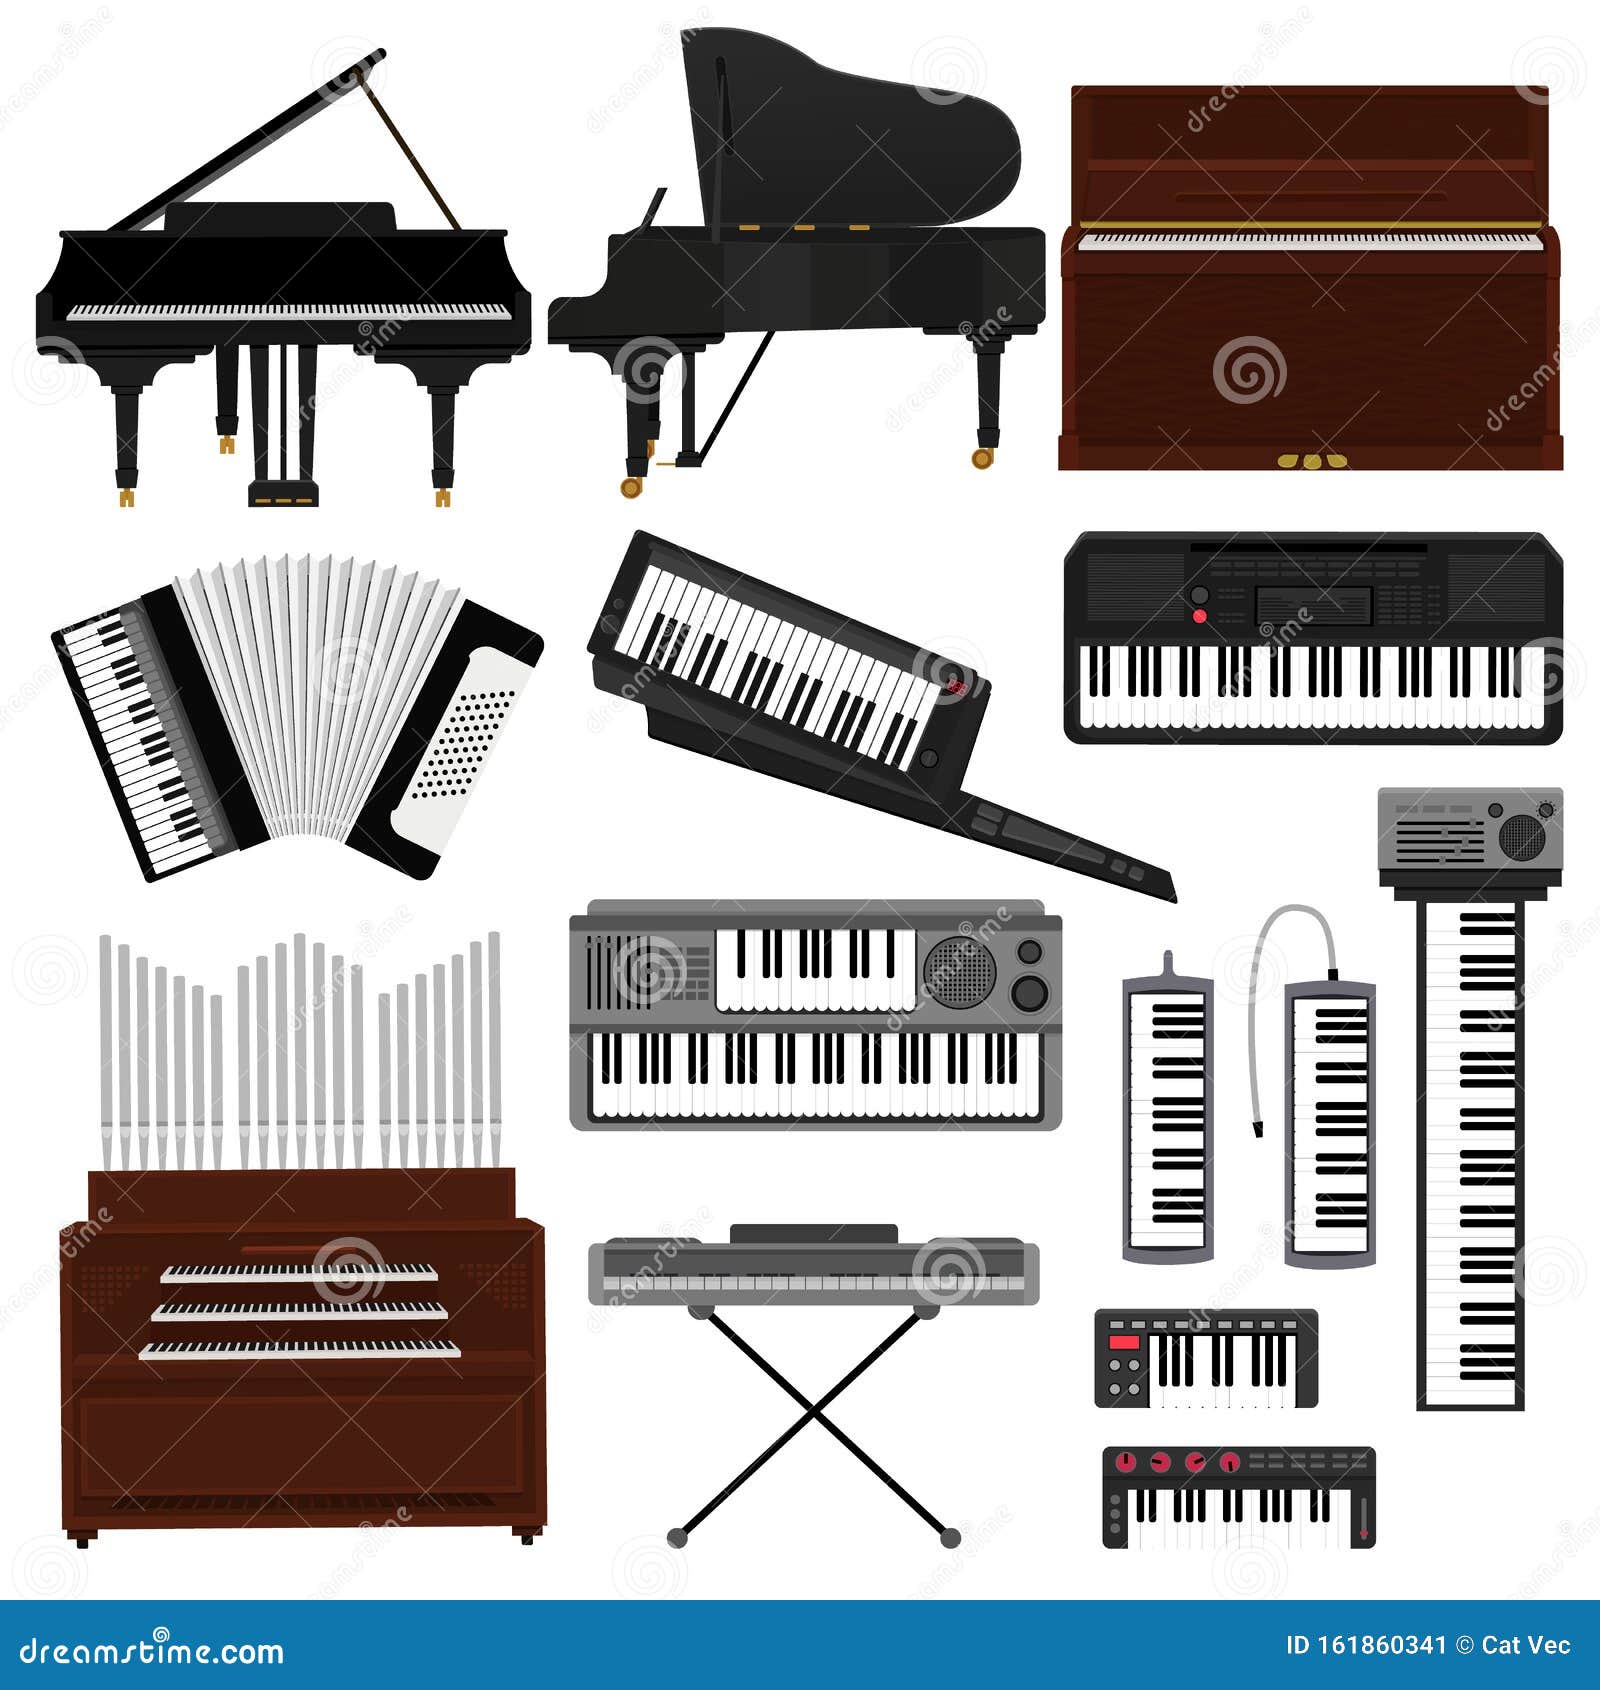 keyboard musical instrument  musician equipment piano of orchestra synthesizer accordion classical pianoforte